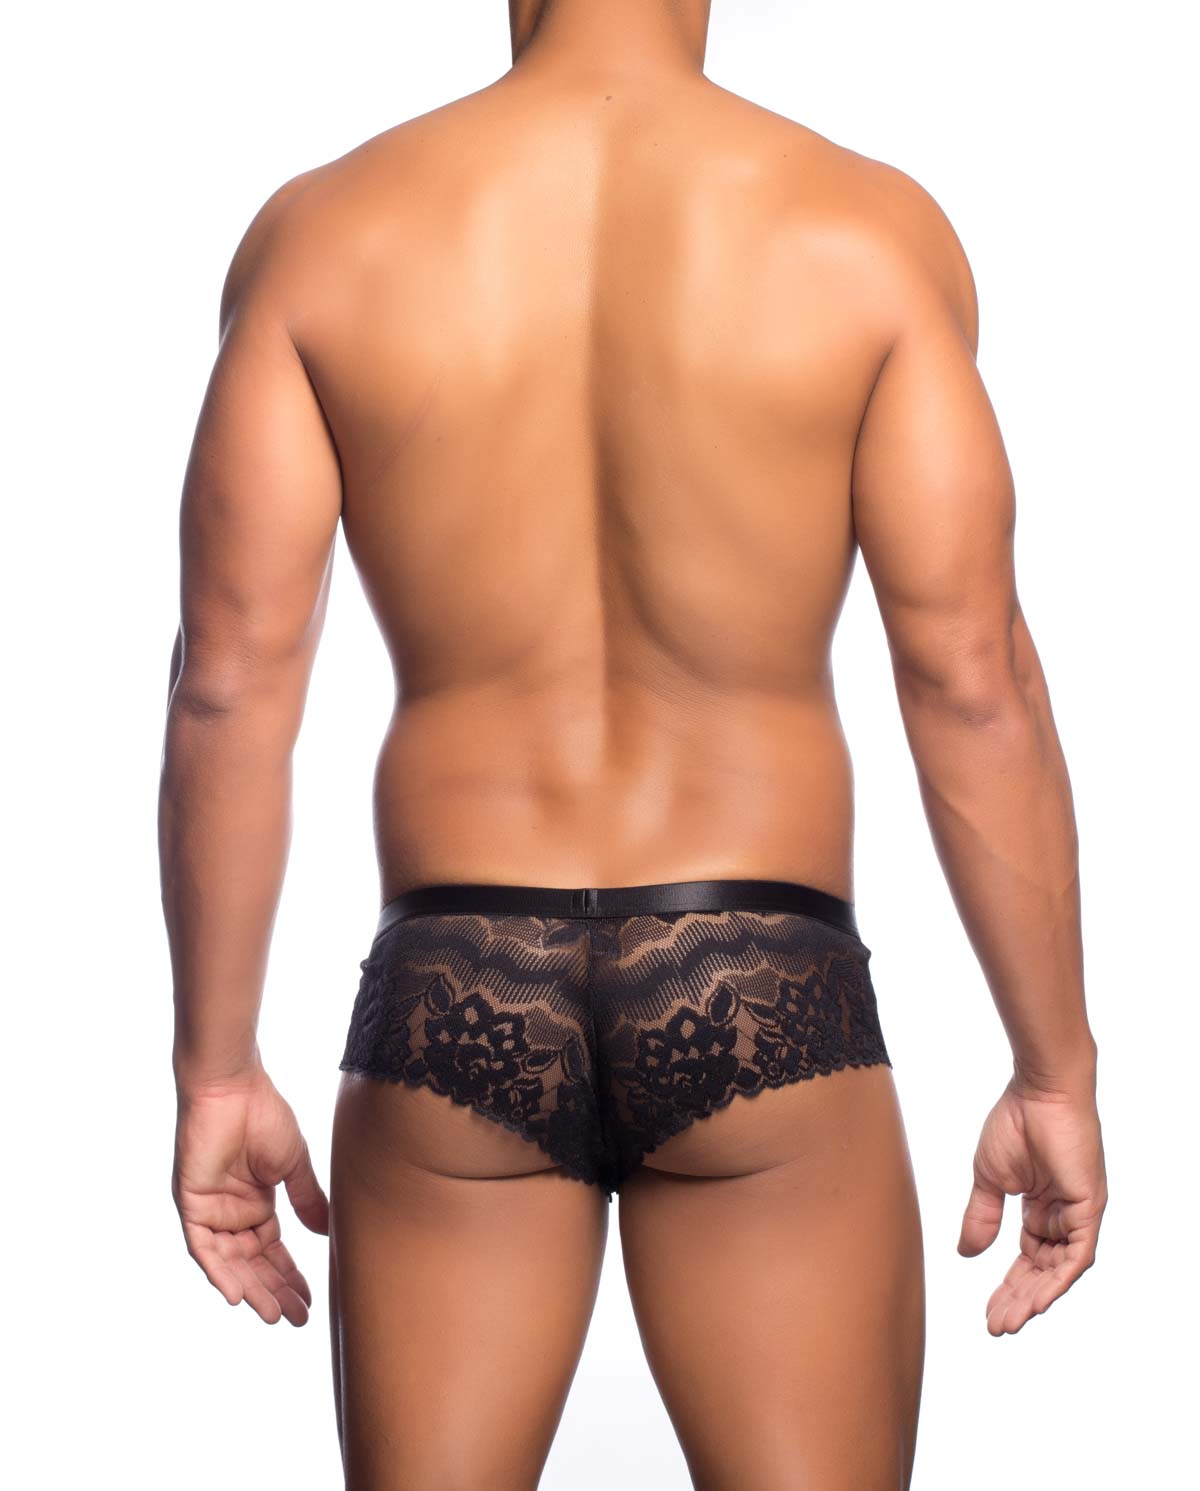 MOB Men's Lace Cheek Boxer available at www.MensUnderwear.io - 1